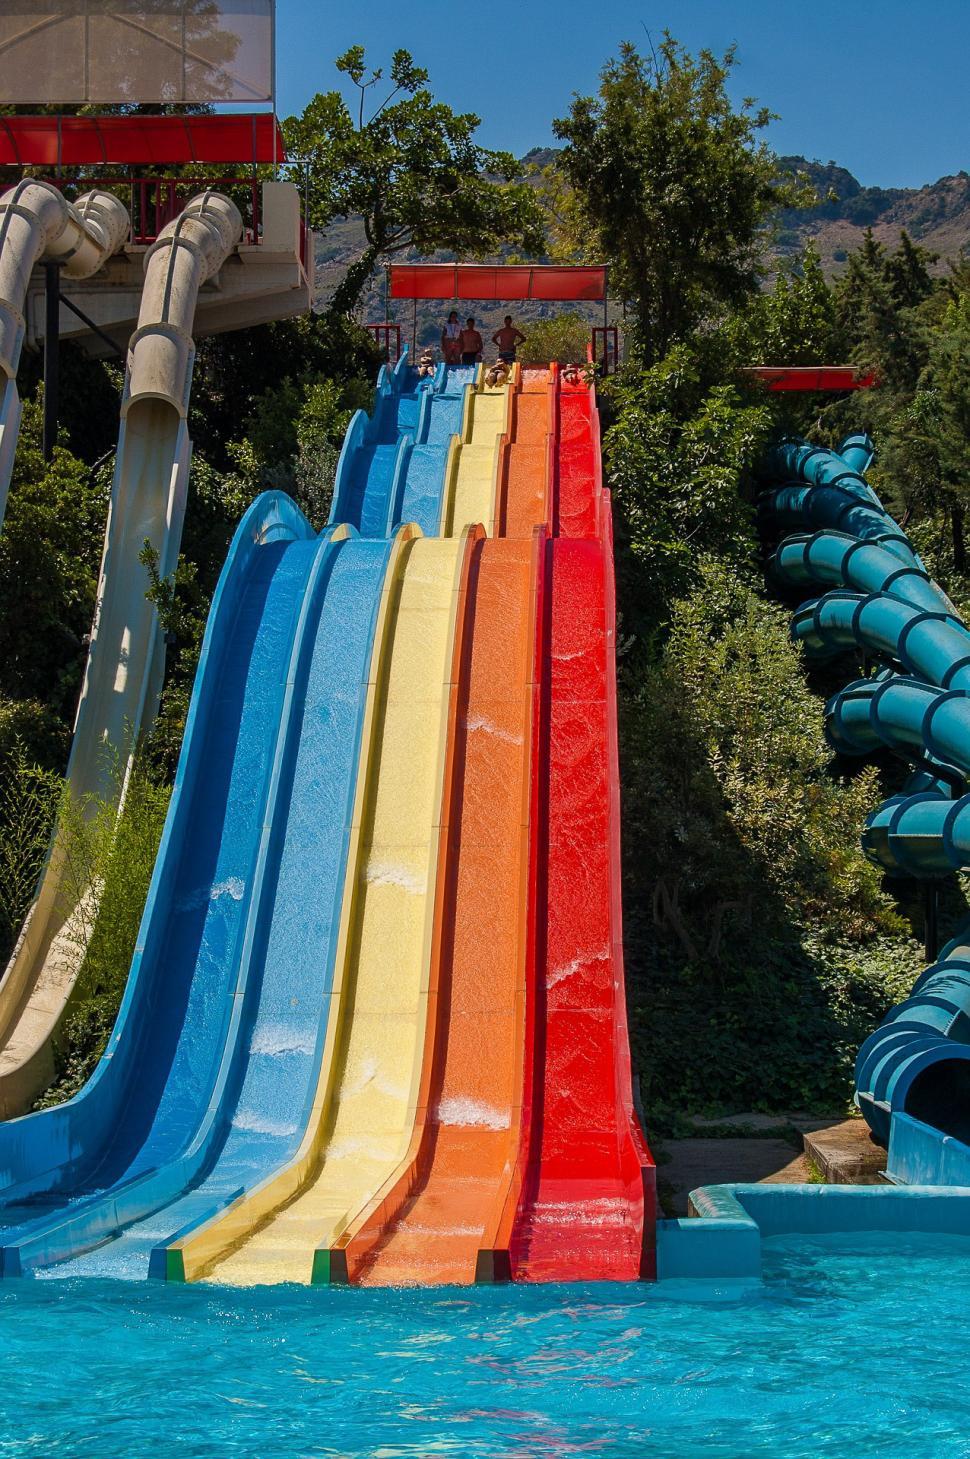 Free Image of Colorful Water Slide in Swimming Pool 